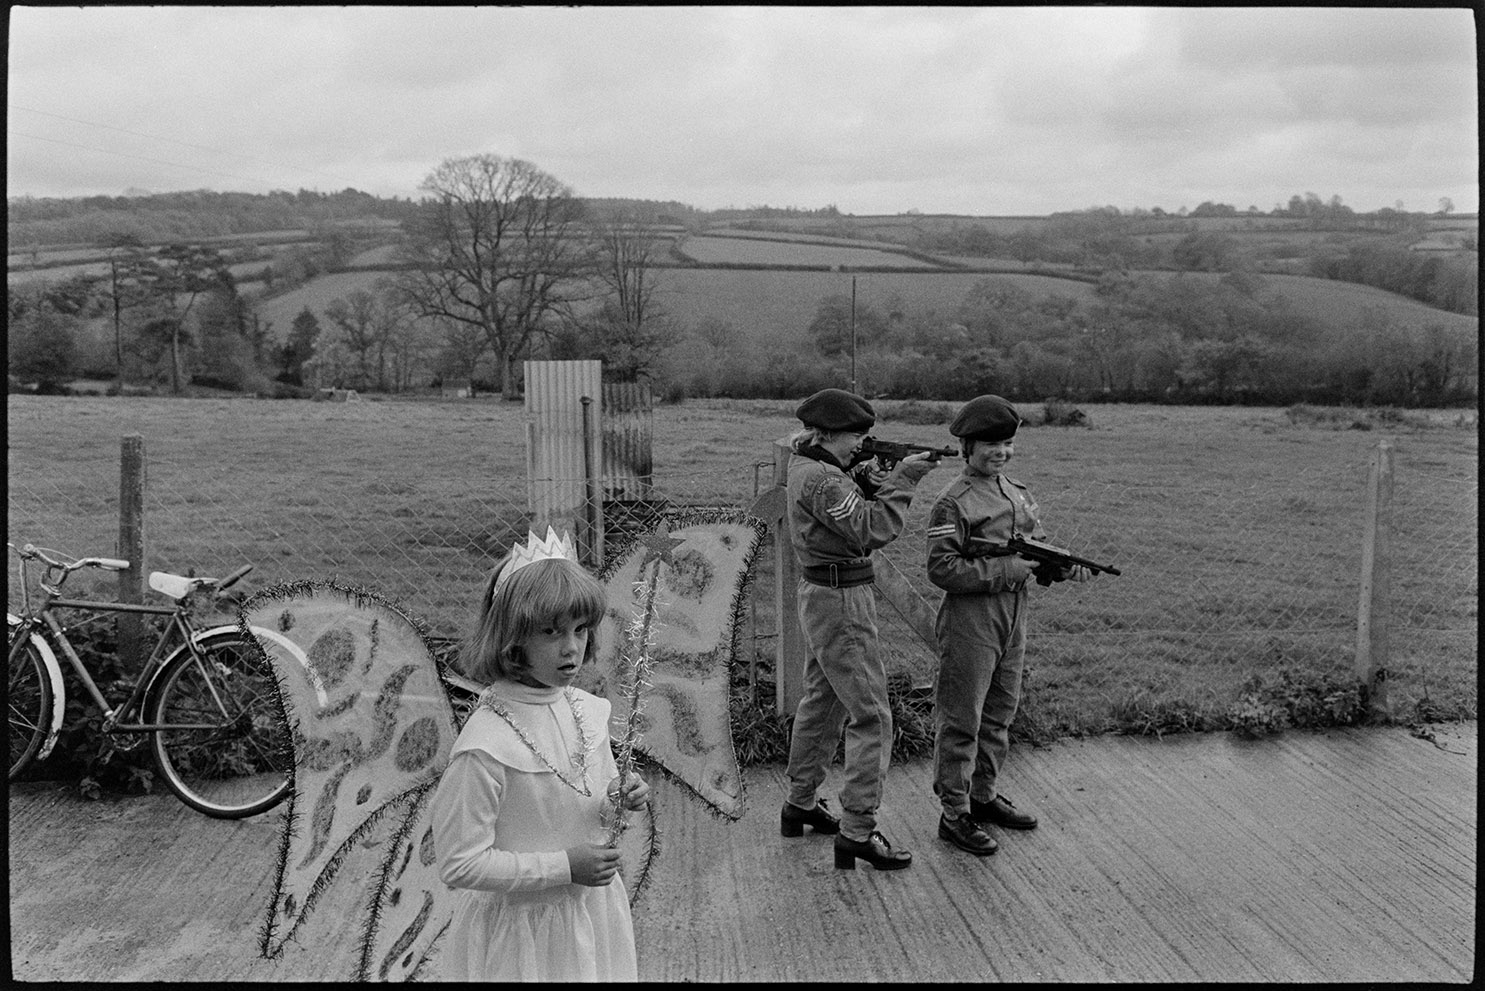 Children in fancy dress - fairy and soldiers, Dolton, October 1975